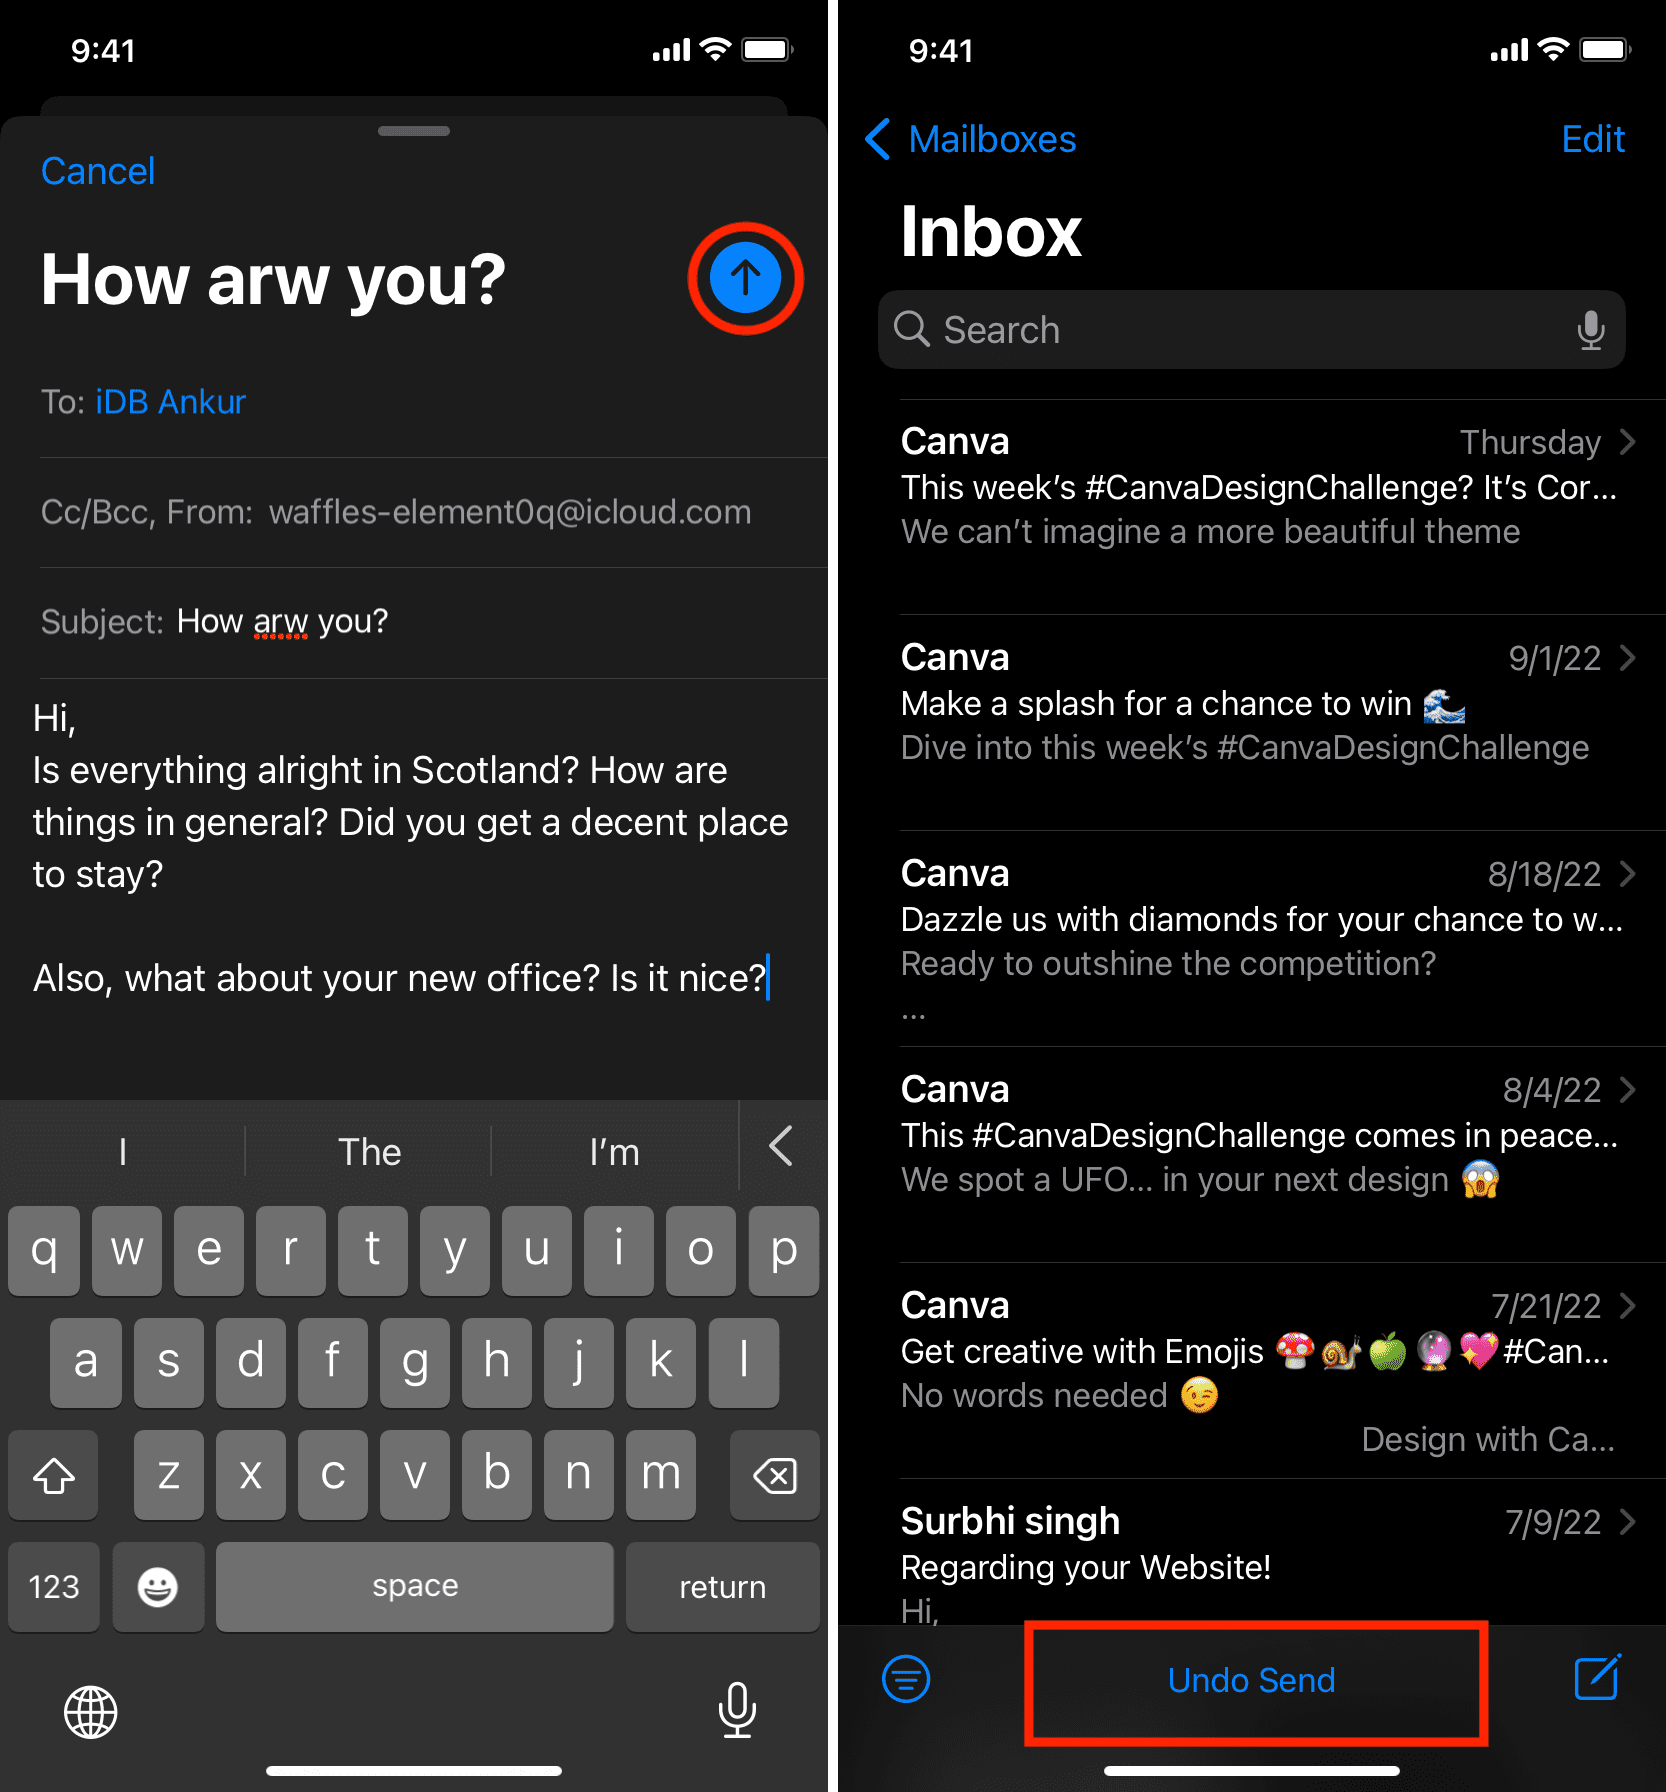 Two iPhone screenshots showing how to Undo Send an email in iPhone Mail app